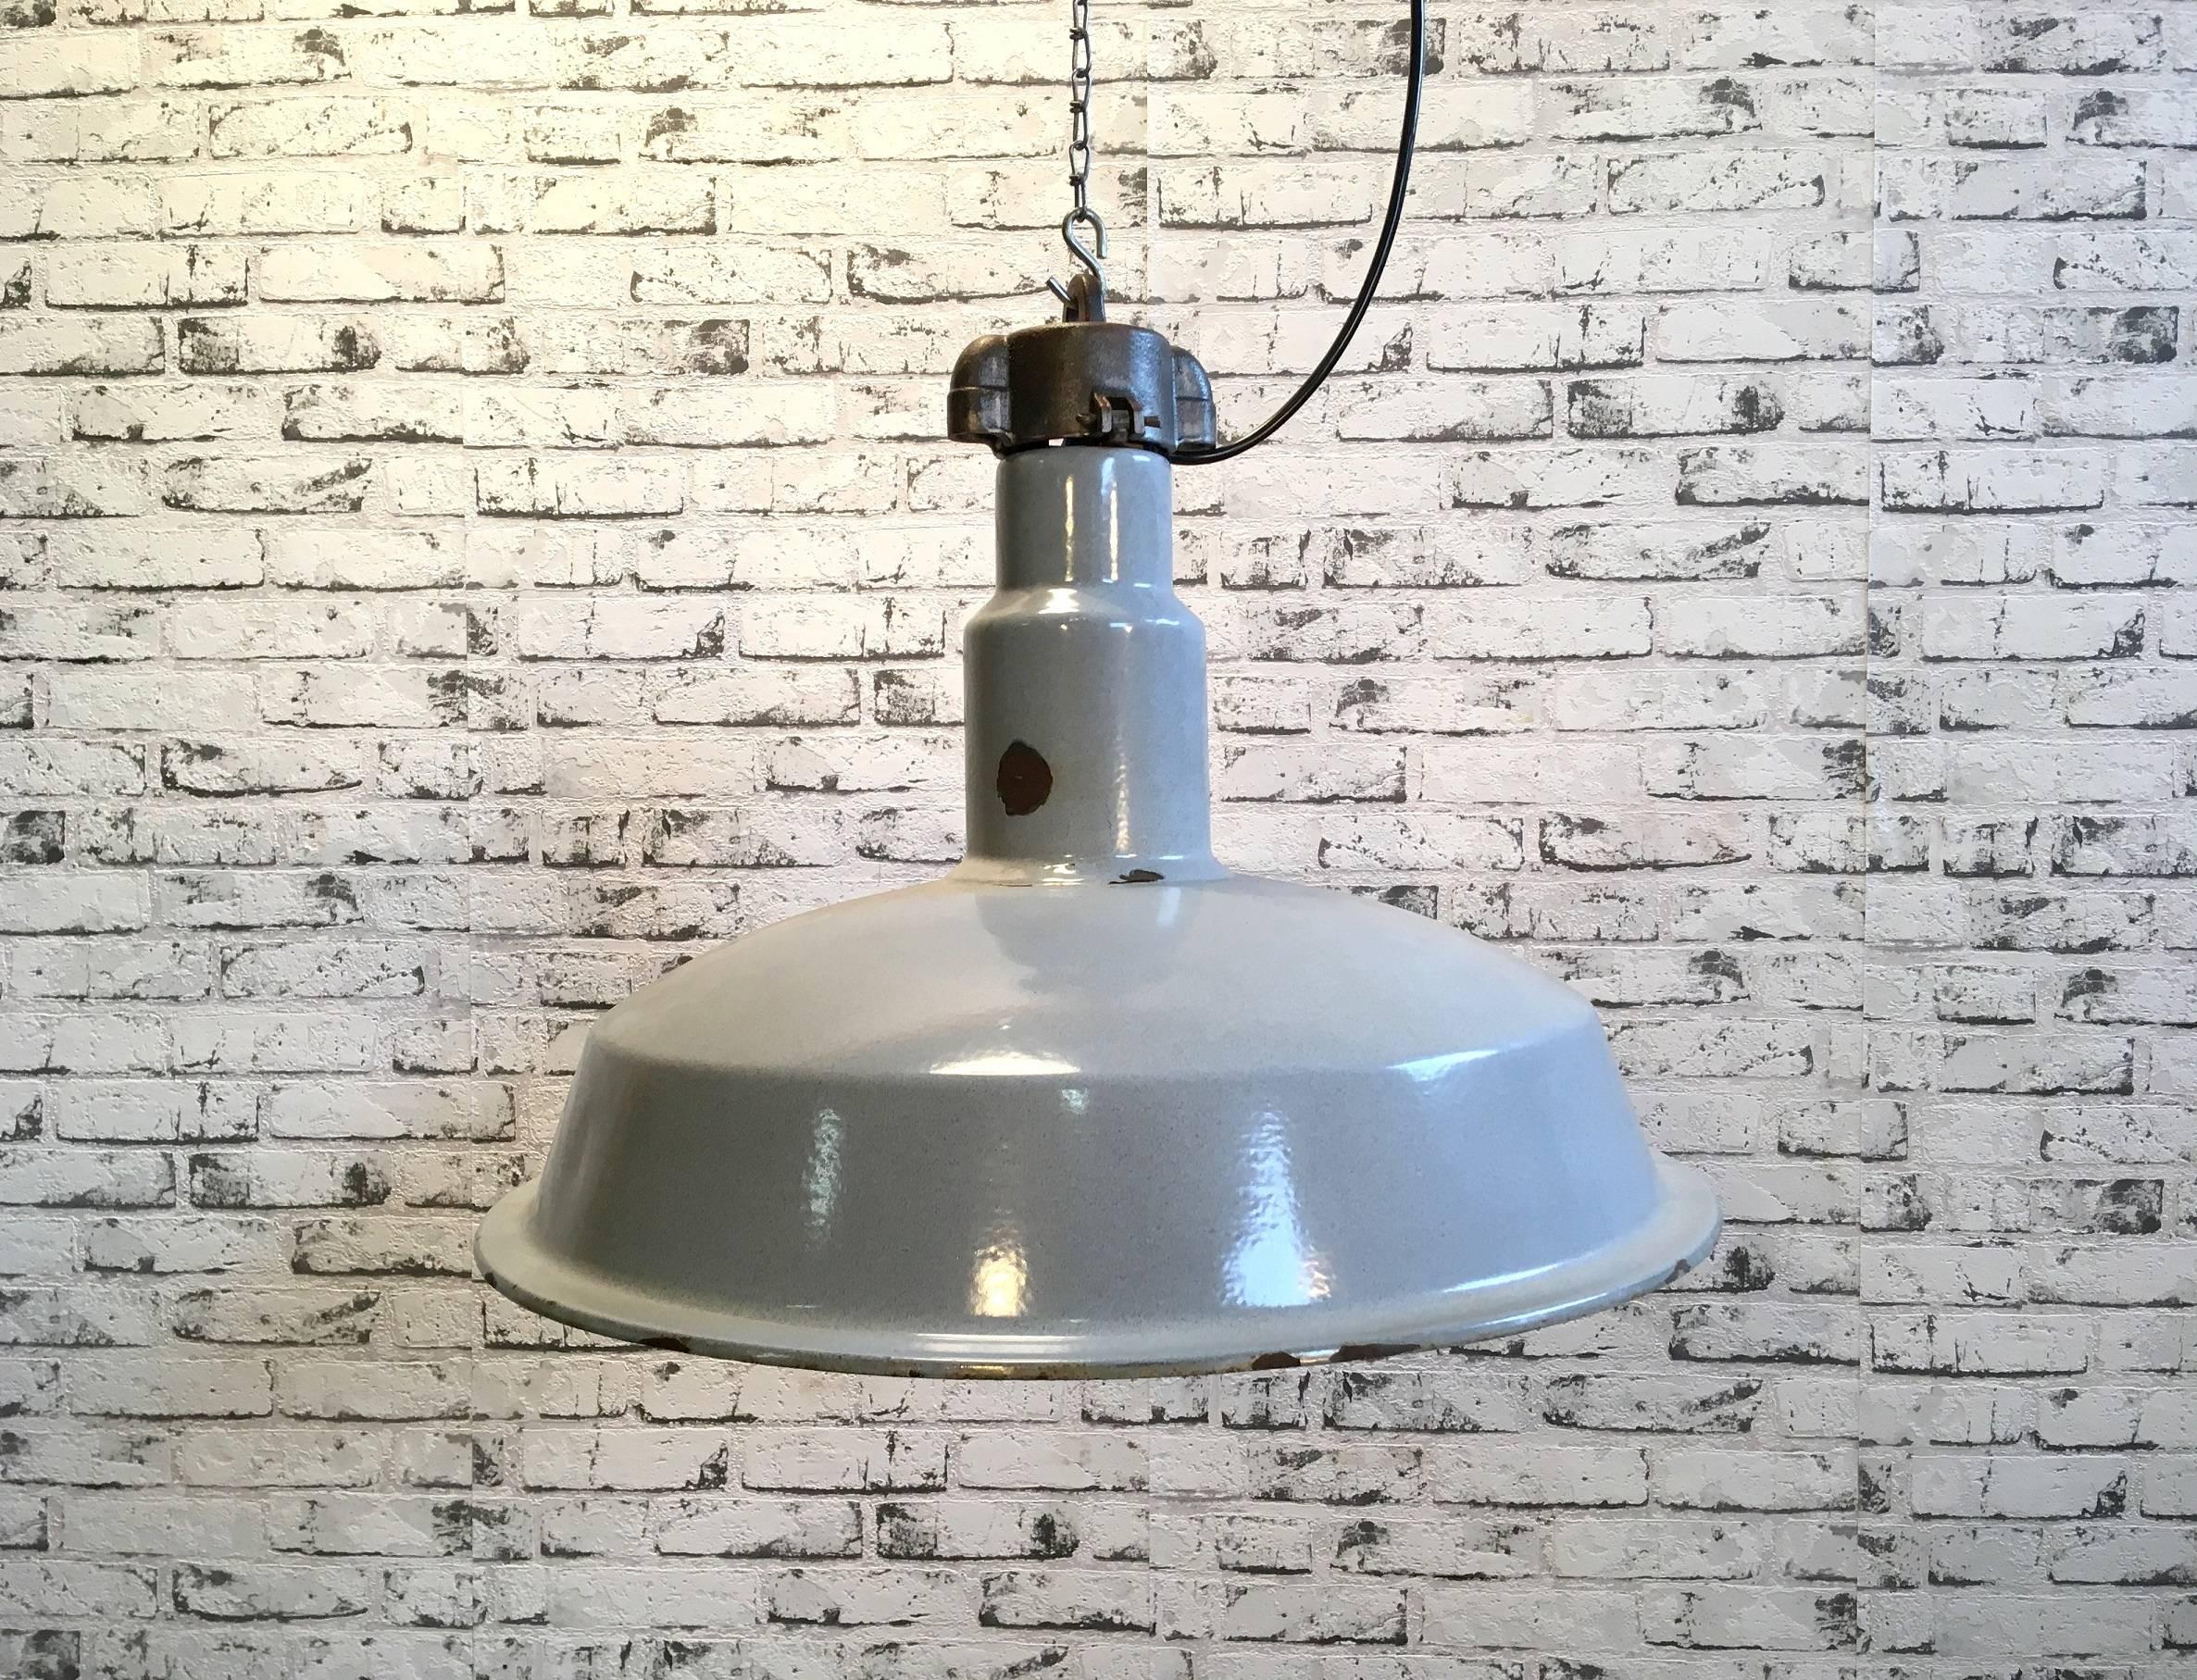 - Vintage industrial lamp with grey enamel featuring a white interior
- Cast iron top
- New E 27 socket and wire.